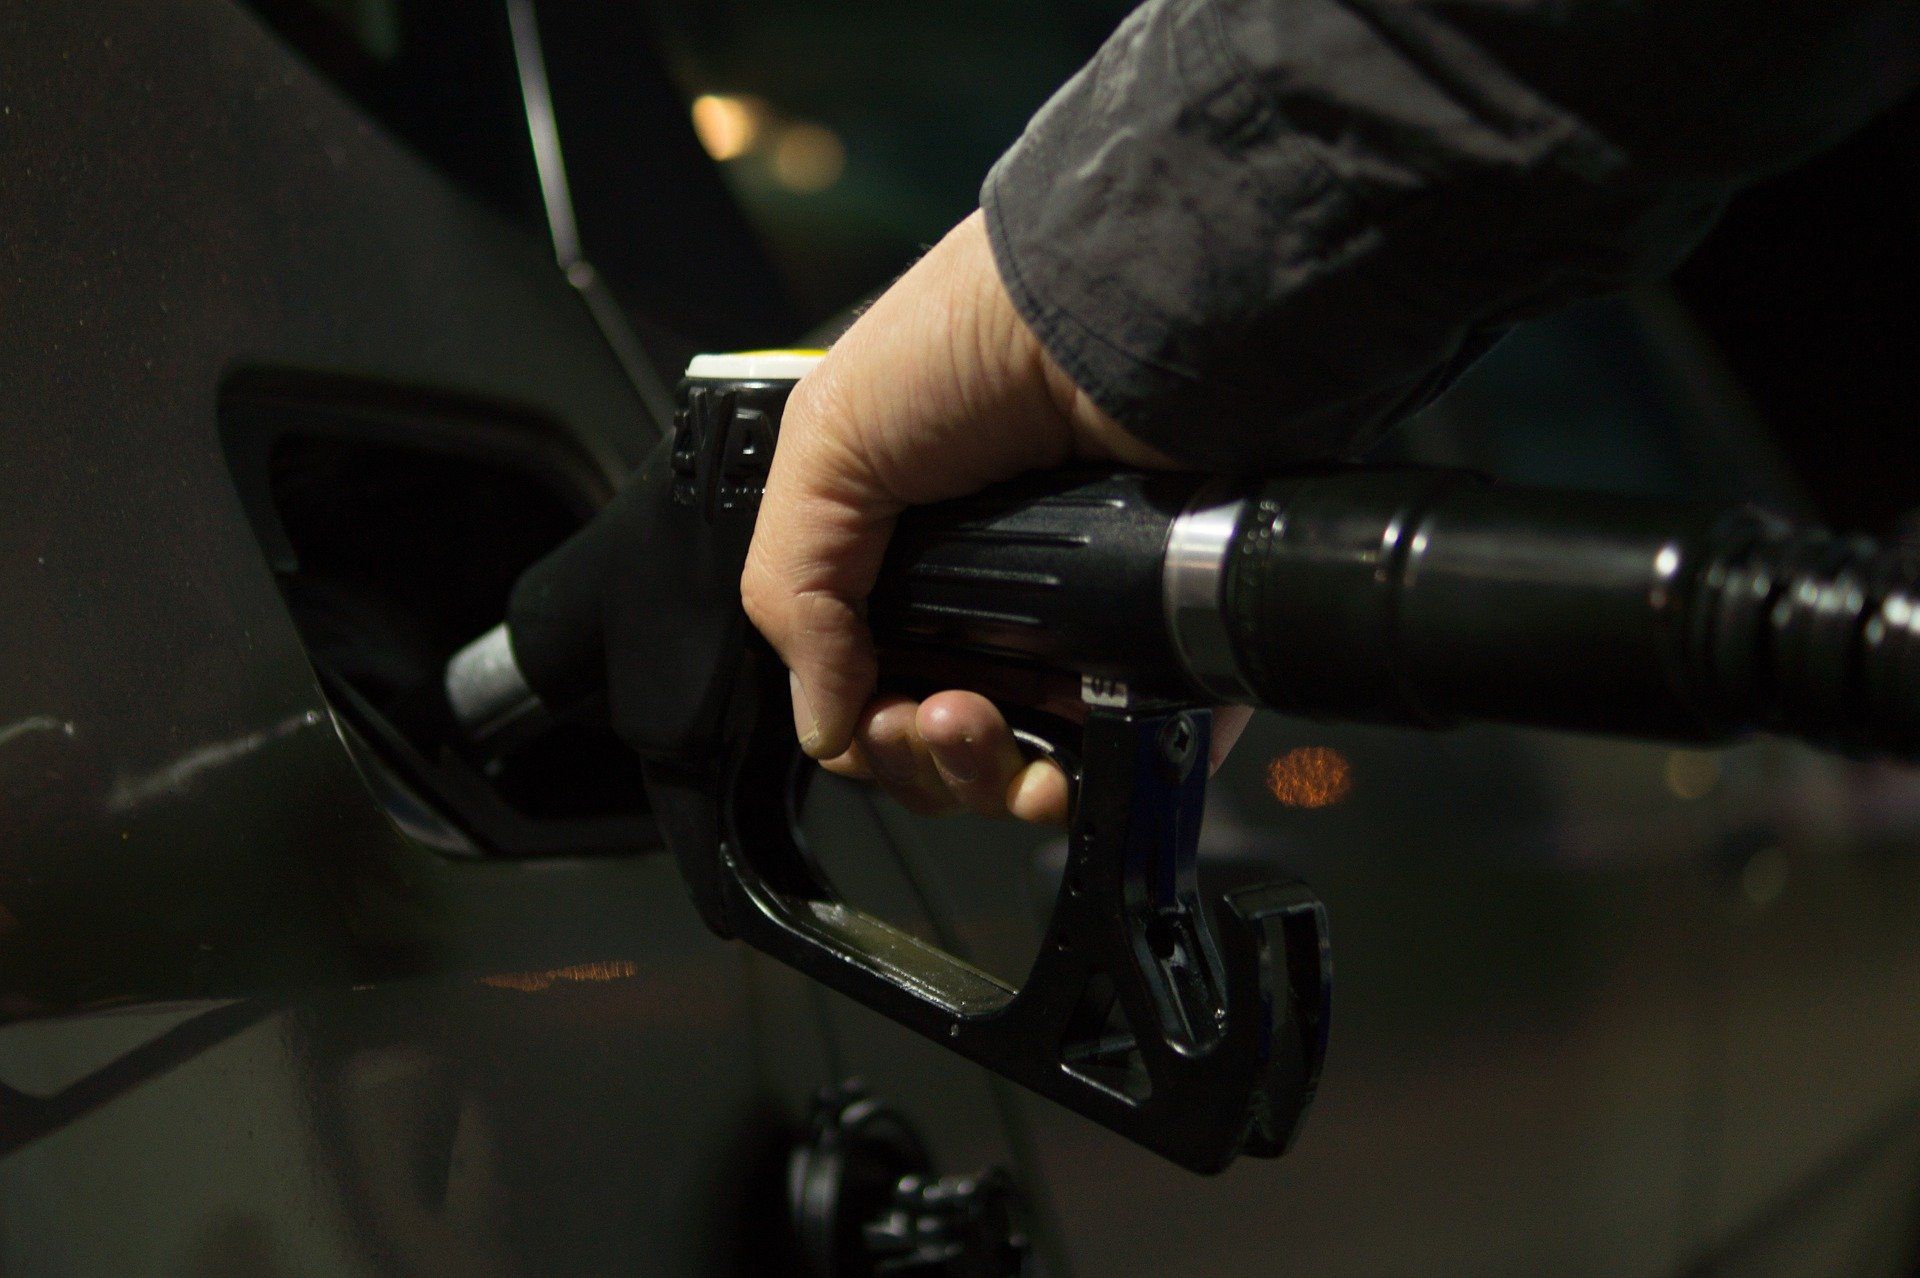 Fuel prices today: Petrol priced at Rs 95.41, diesel Rs 86.67 in Delhi on January 14, 2022